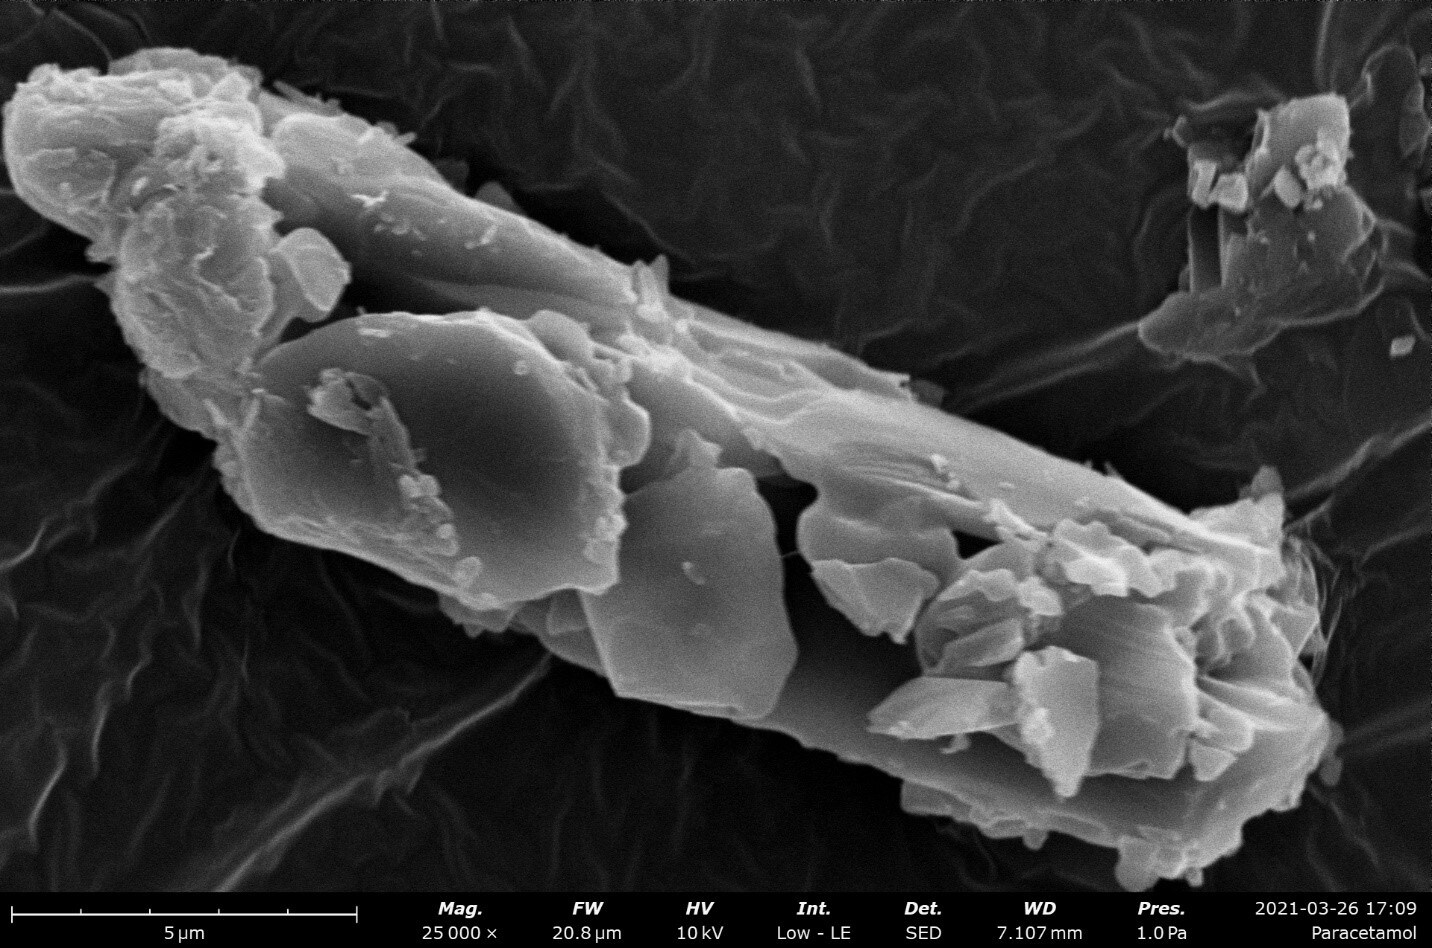 Pharmaceutical particle visualized with a desktop SEM.